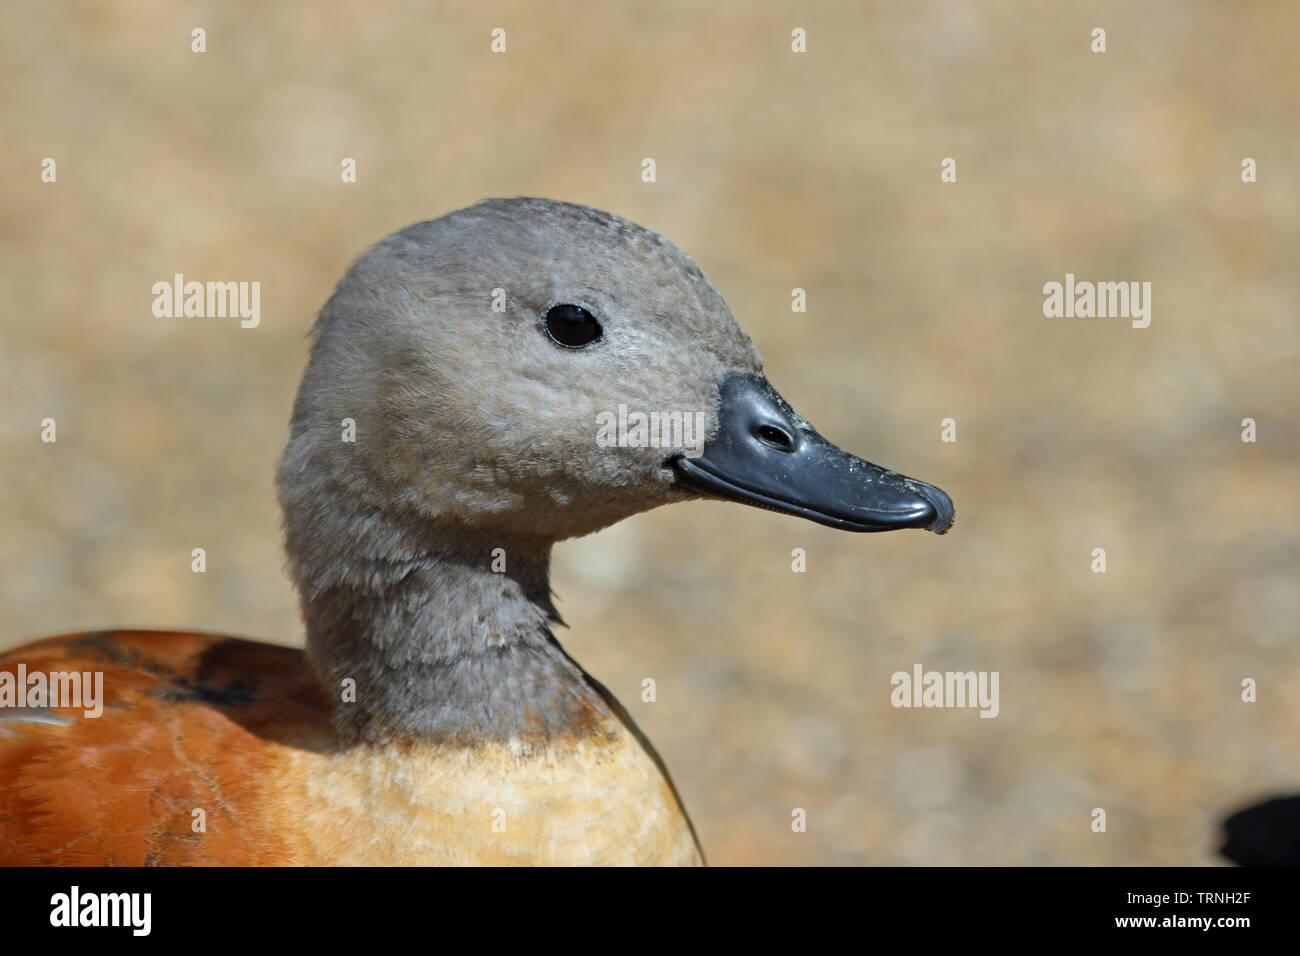 Cape or South African Shelduck, Tadorna cana, male head and shoulders facing right with a blurred gravel background. Stock Photo